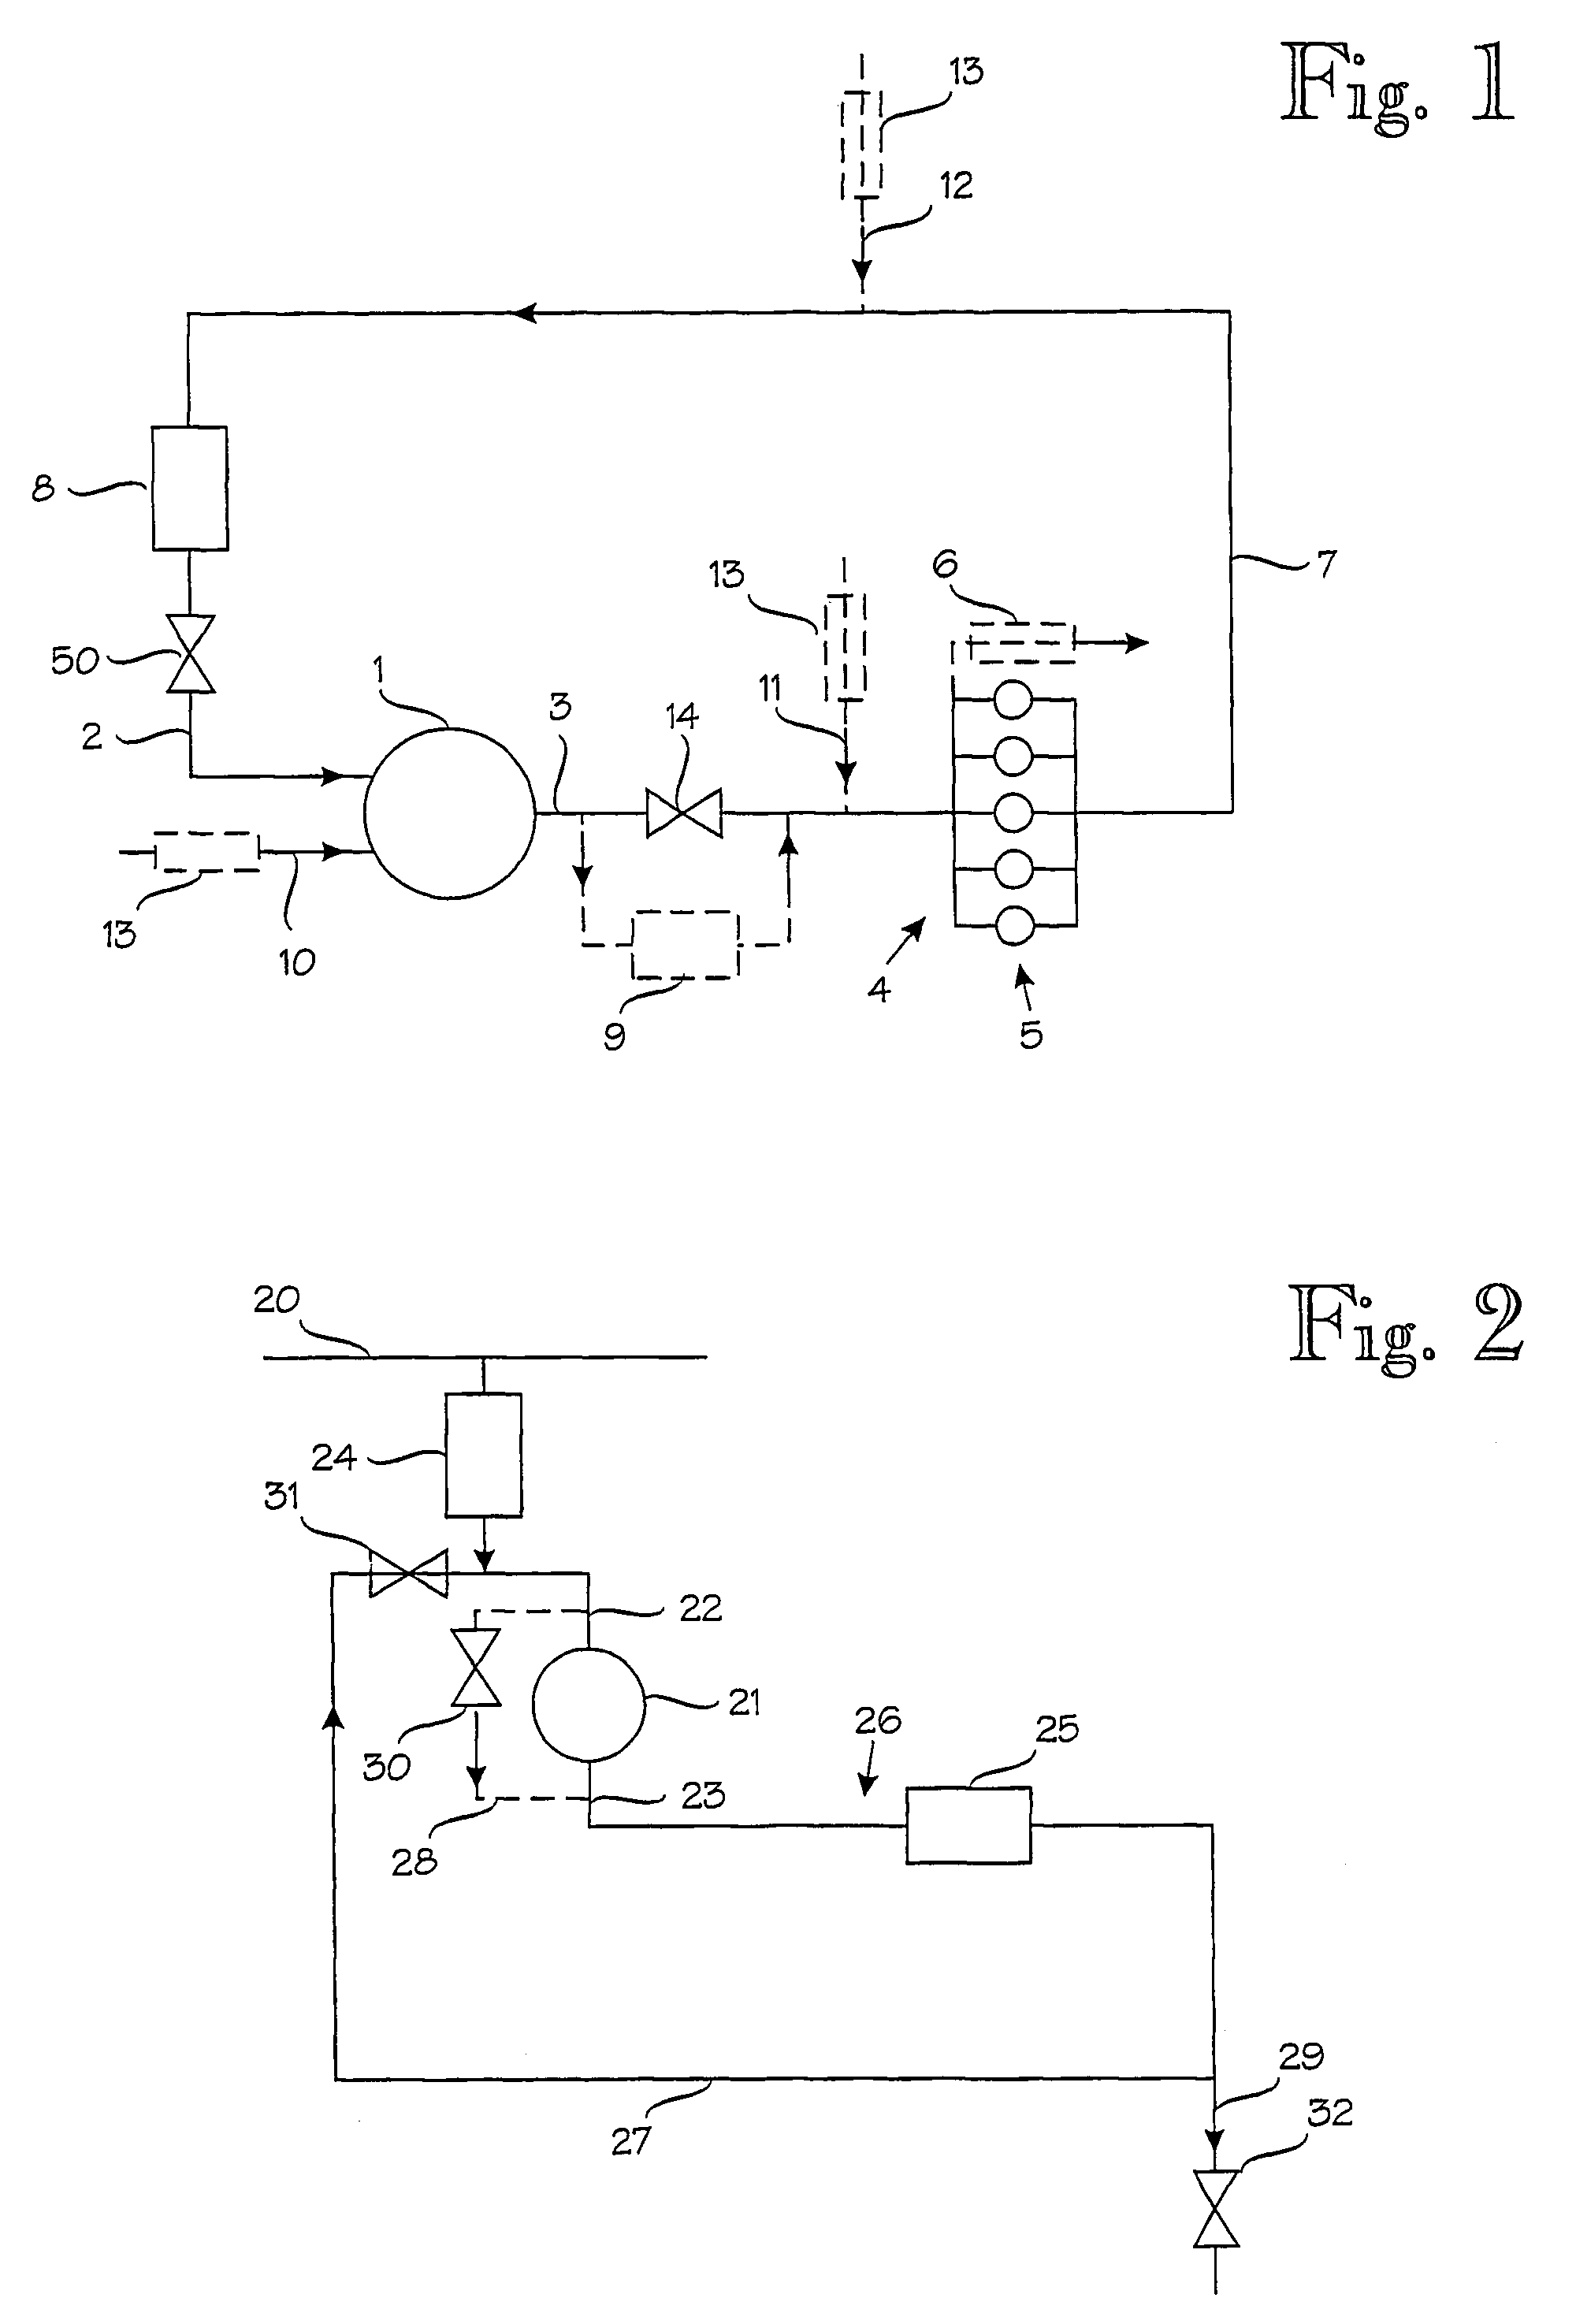 System for producing and distributing compressed air